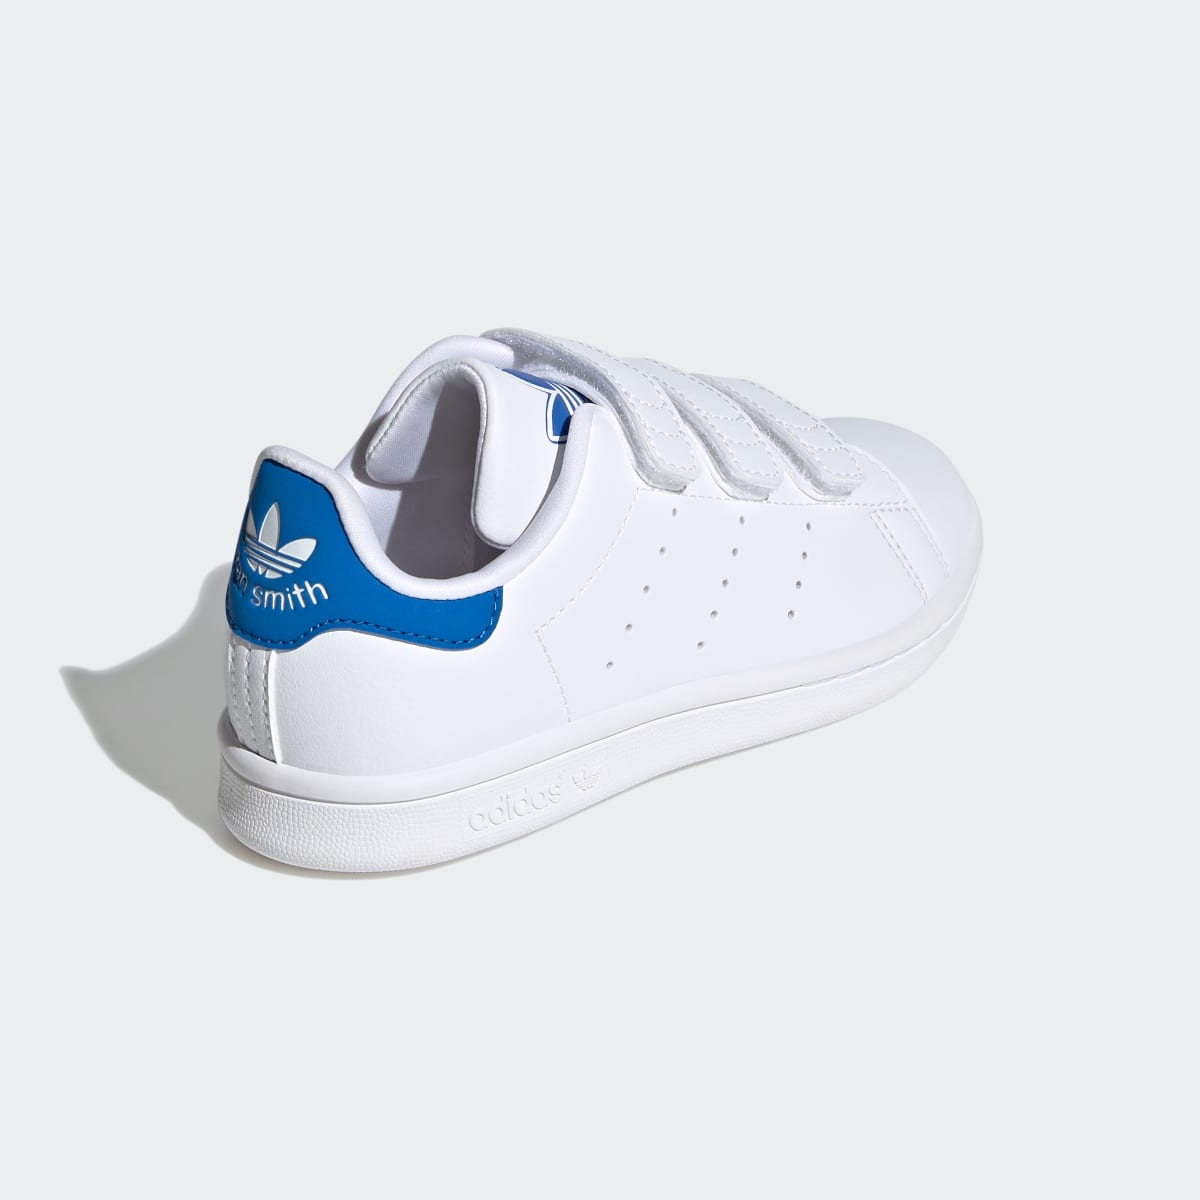 Adidas Stan Smith Comfort Closure Shoes Kids. 6